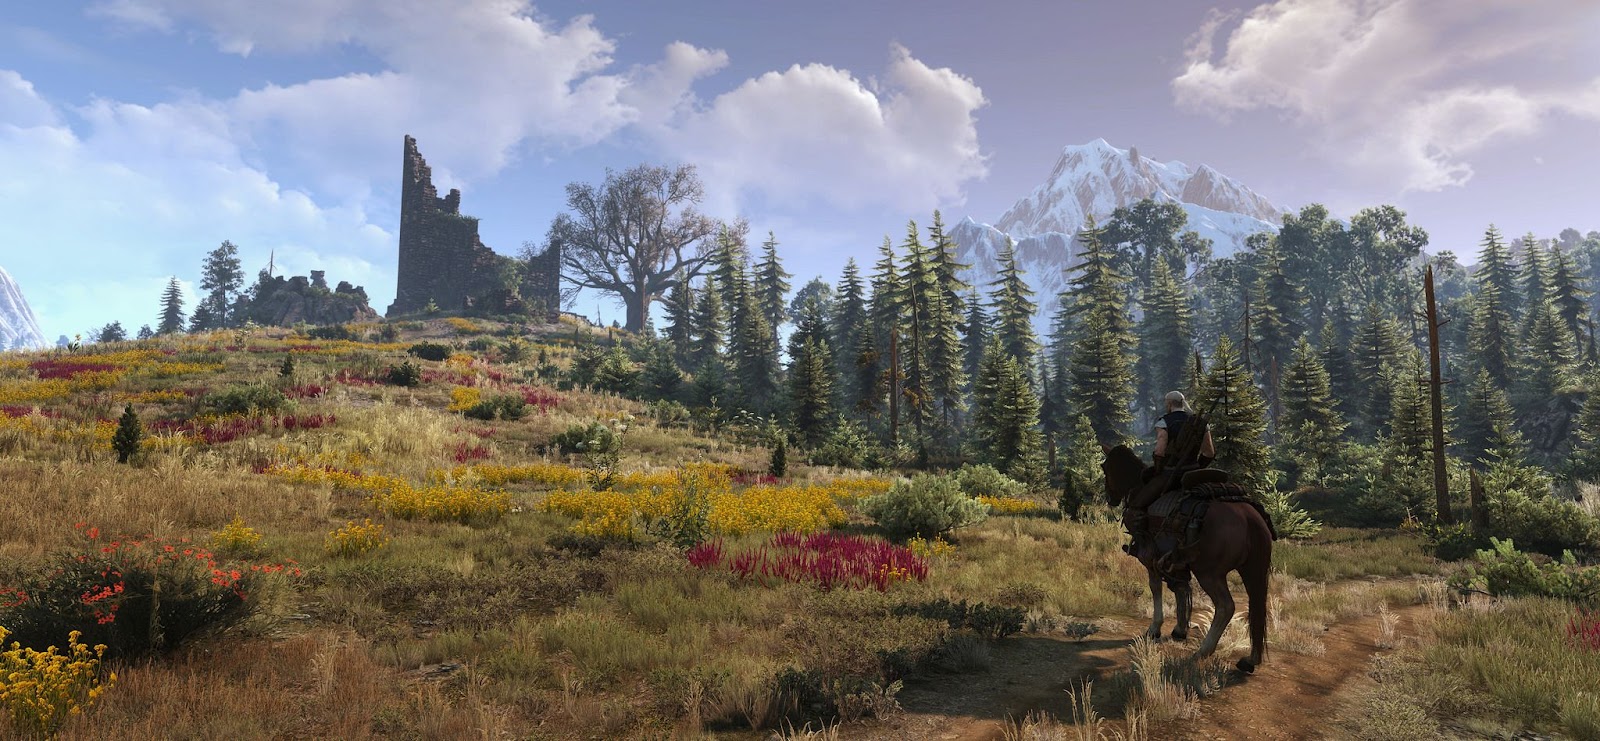 Vanilla Skyrim can't beat Witcher 3 in terms of graphical fidelity